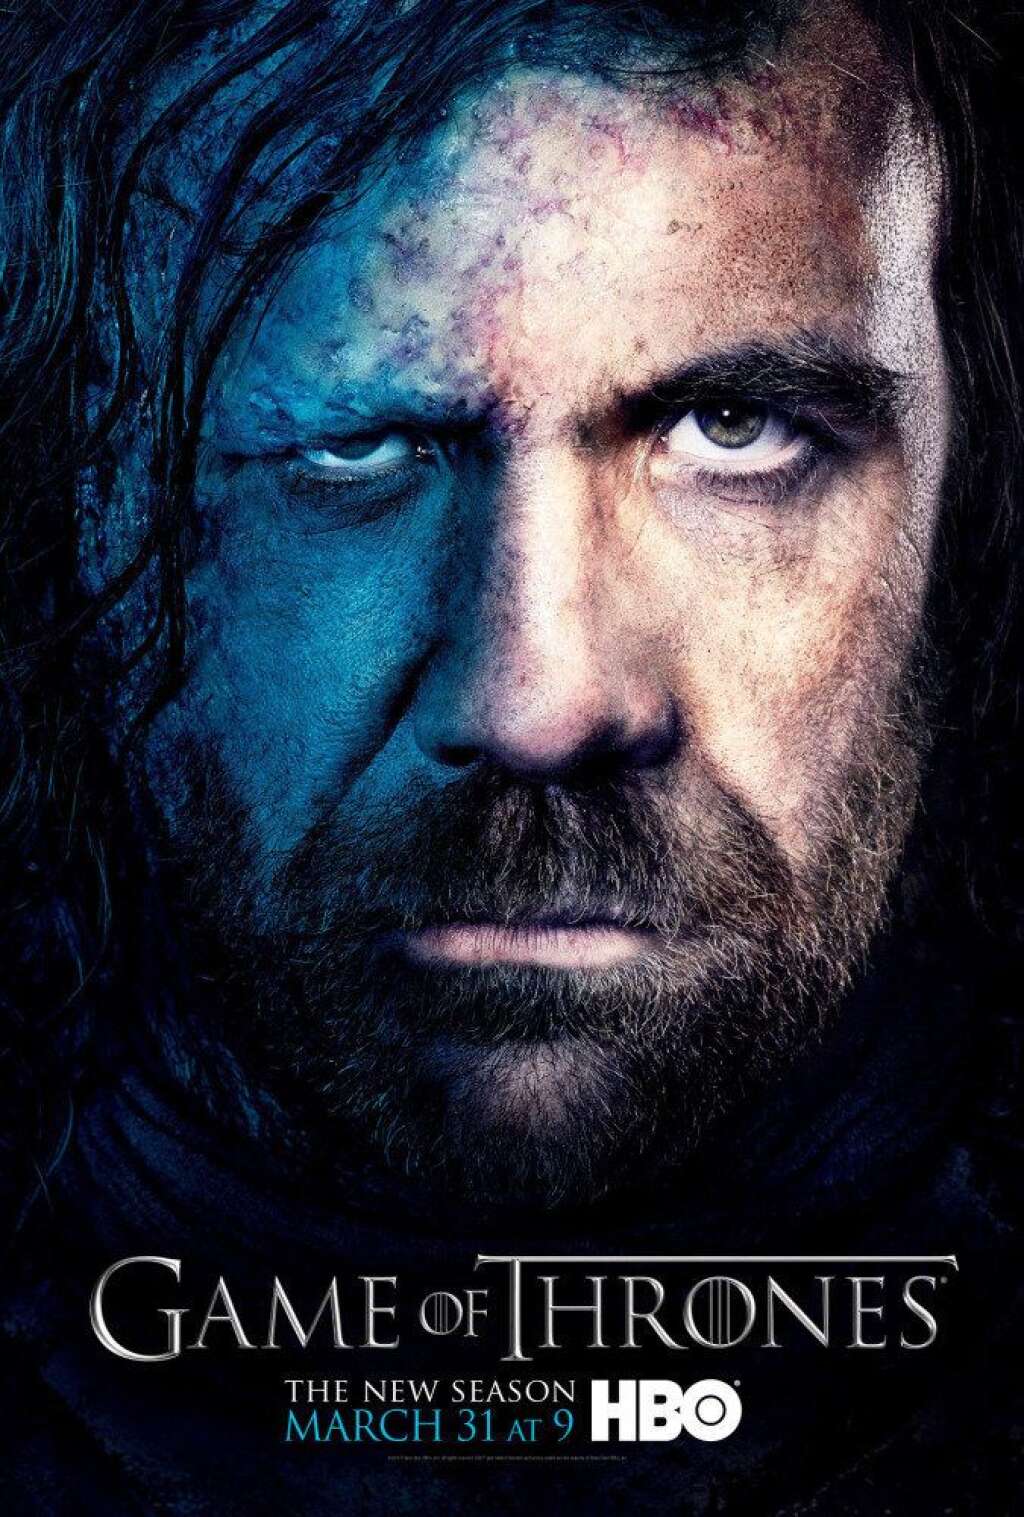 'Game of Thrones' Character Posters - Rory McCann as Sandor Clegane (The Hound).